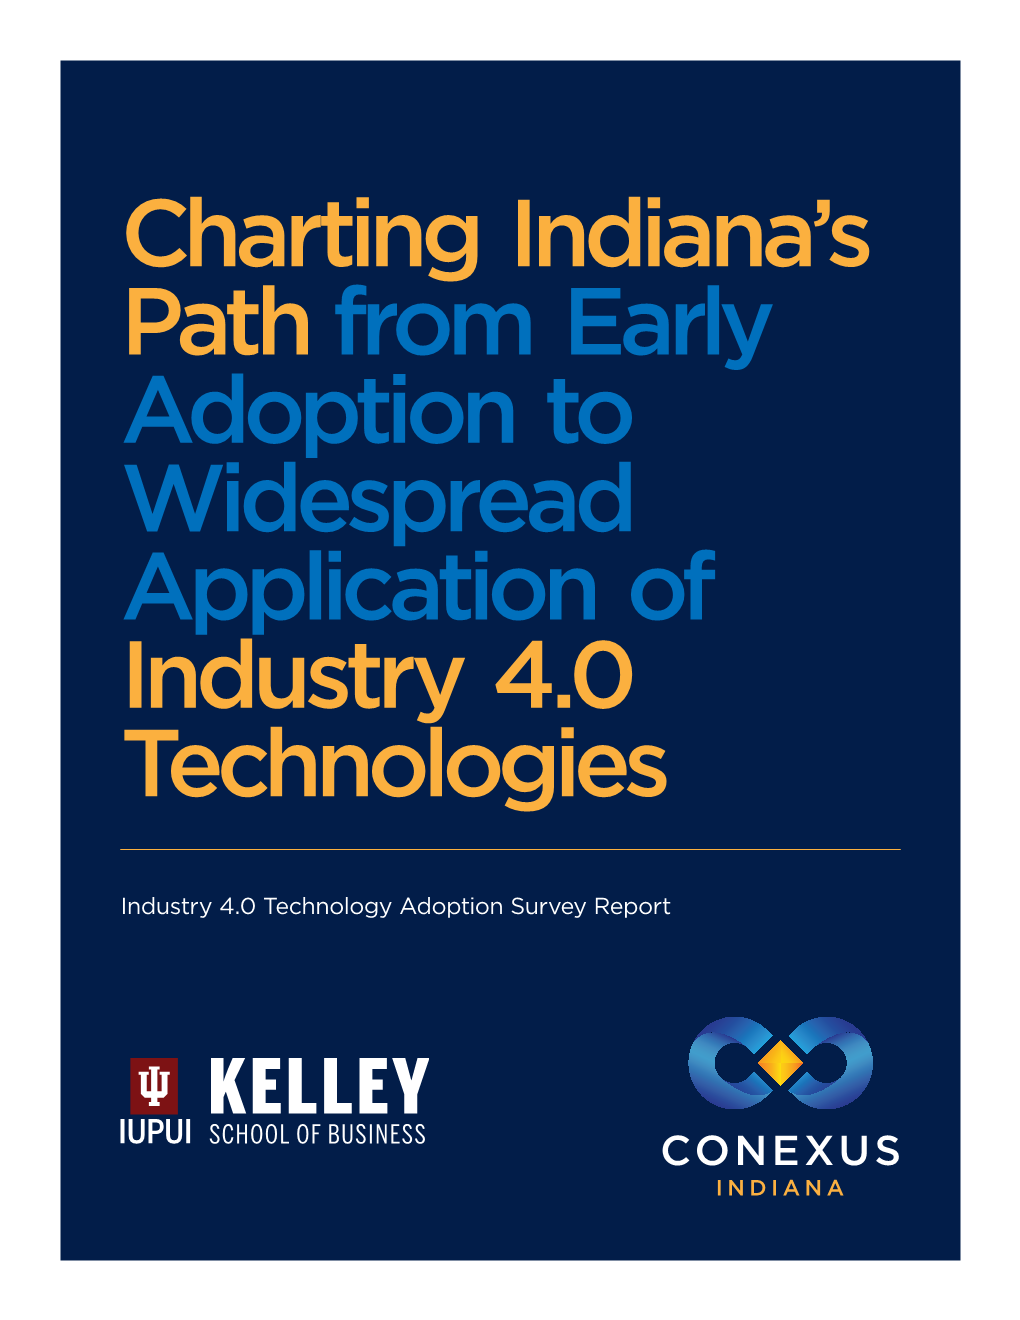 Charting Indiana's Pathfrom Early Adoption to Widespread Application of Industry 4.0 Technologies